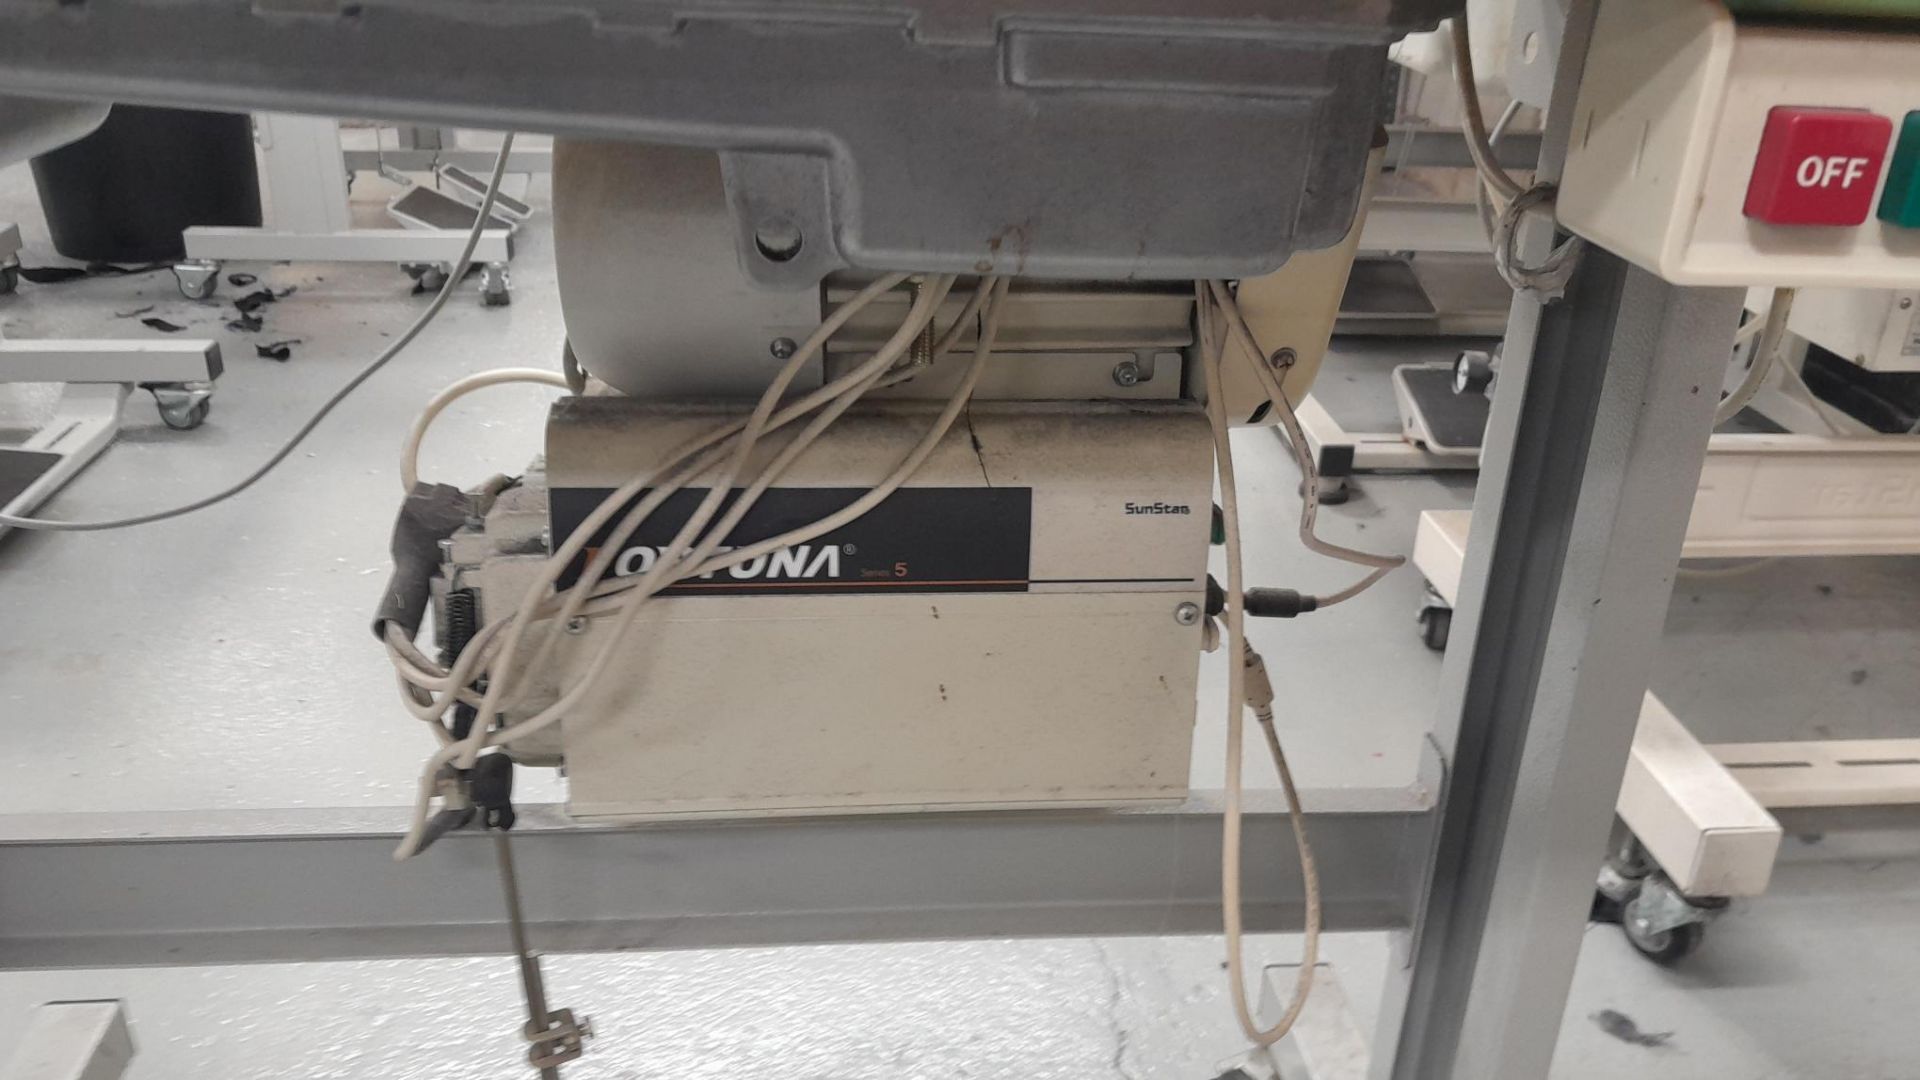 Sunstar KM-350BL-75 Flatbed Sewing Machine Serial Number Unknown, 240v - Image 4 of 5